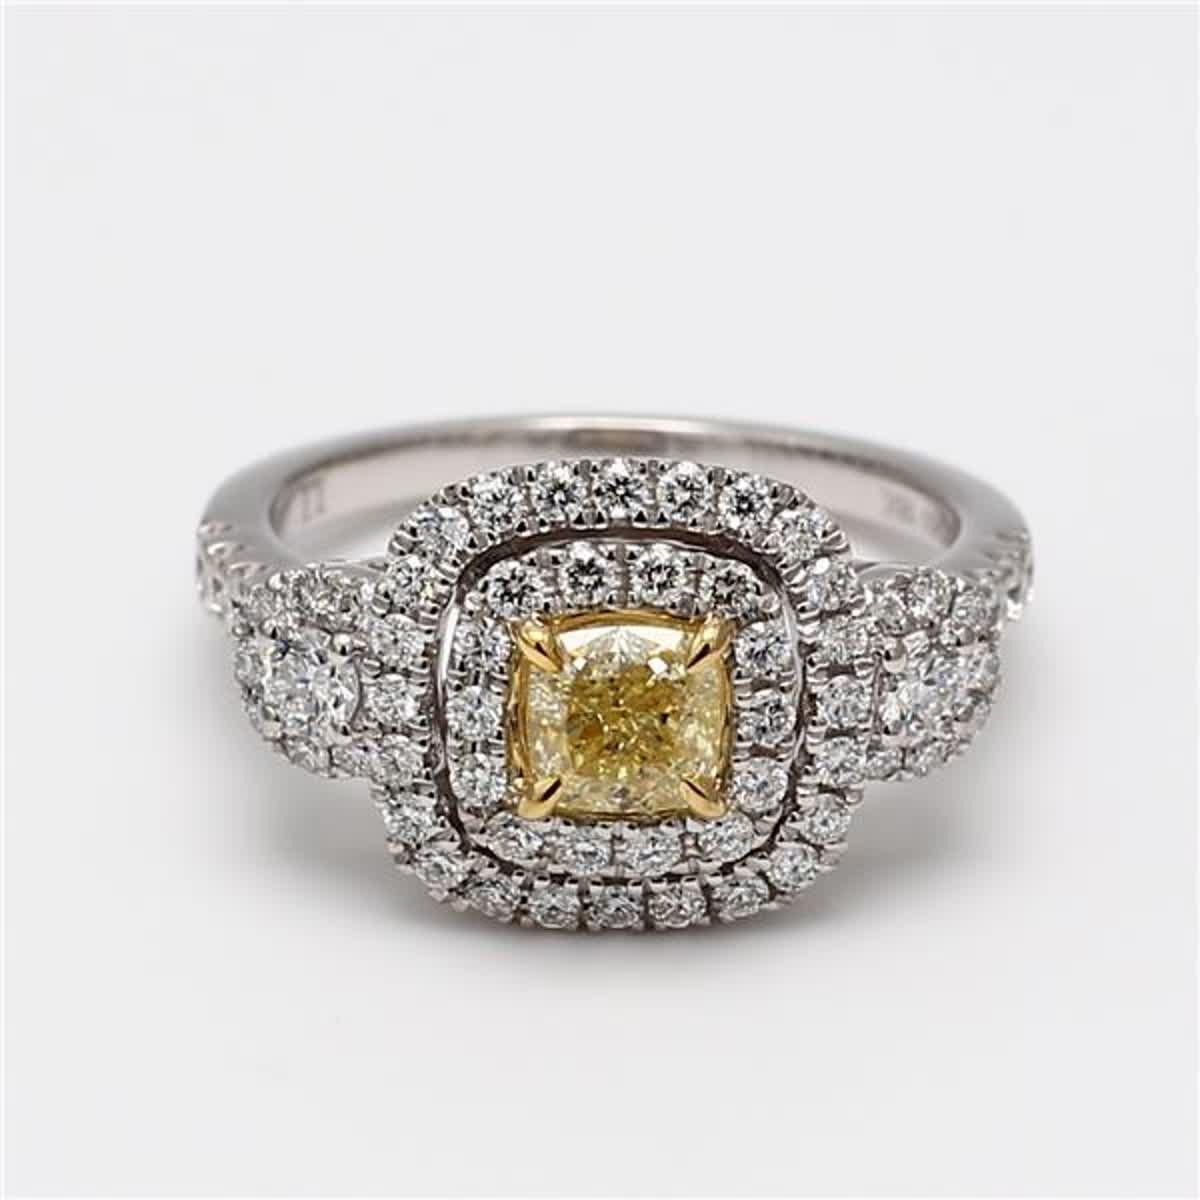 RareGemWorld's classic GIA certified diamond ring. Mounted in a beautiful 18K Yellow and White Gold and Platinum setting with a natural cushion cut yellow diamond. The yellow diamond is surrounded by small round natural white diamond melee. This